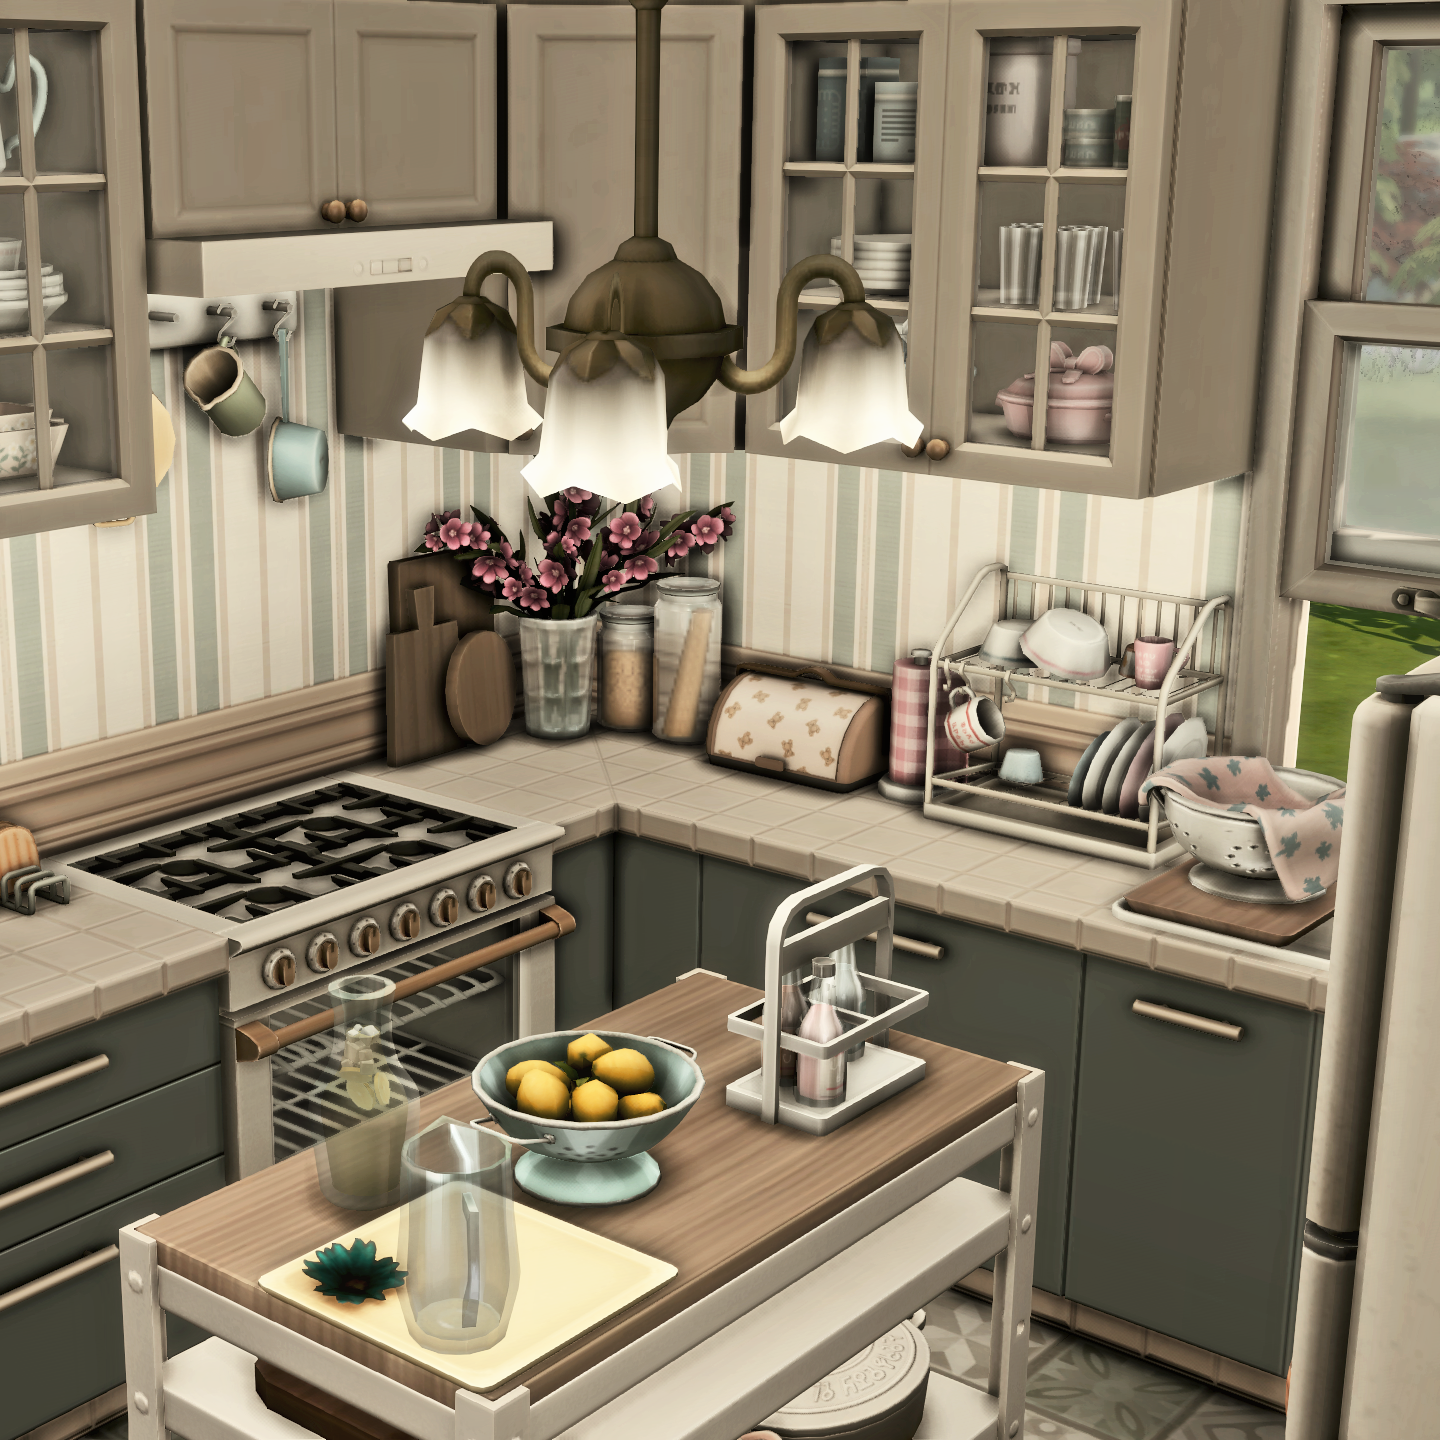 Simsphony - Cluttered retro kitchen project avatar